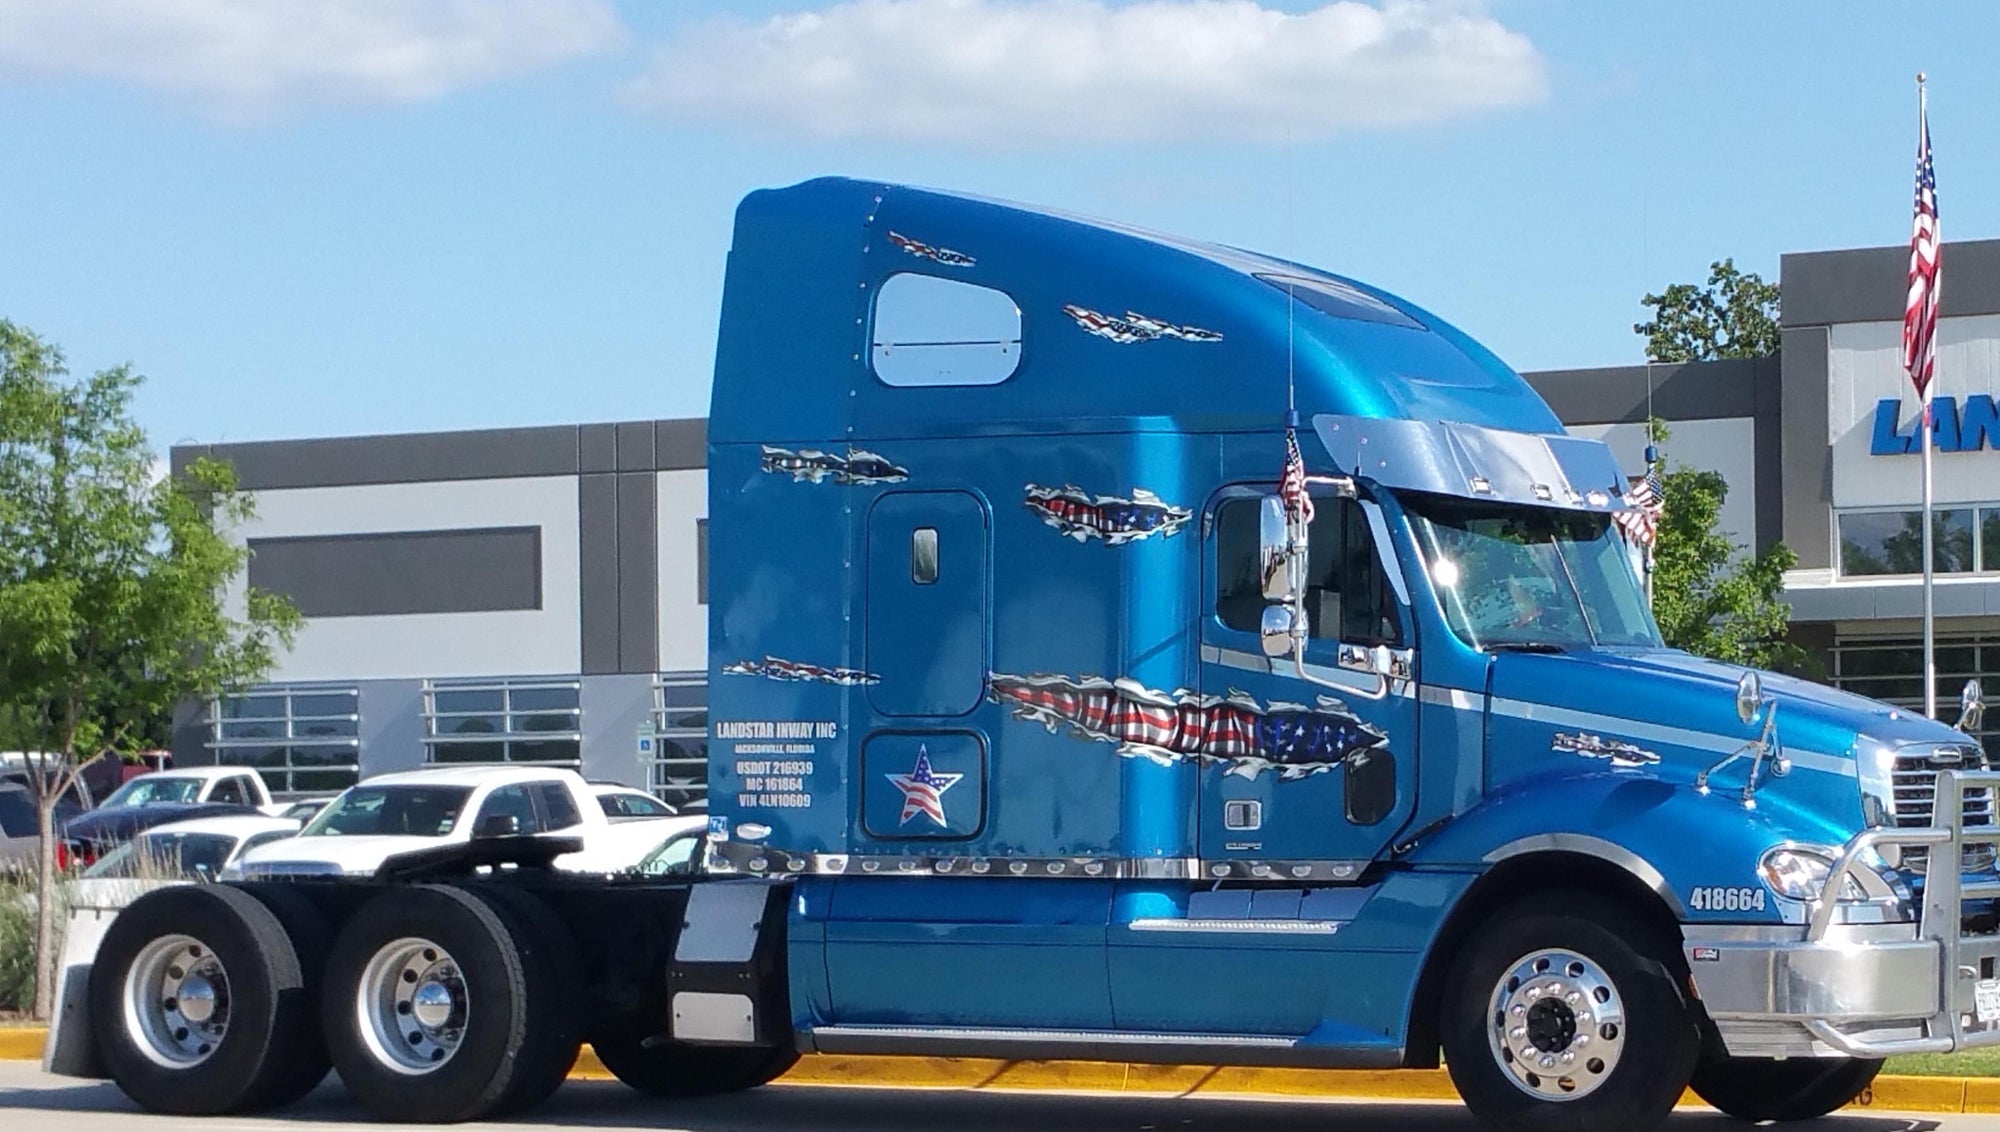 American flag decals on a blue semi truck